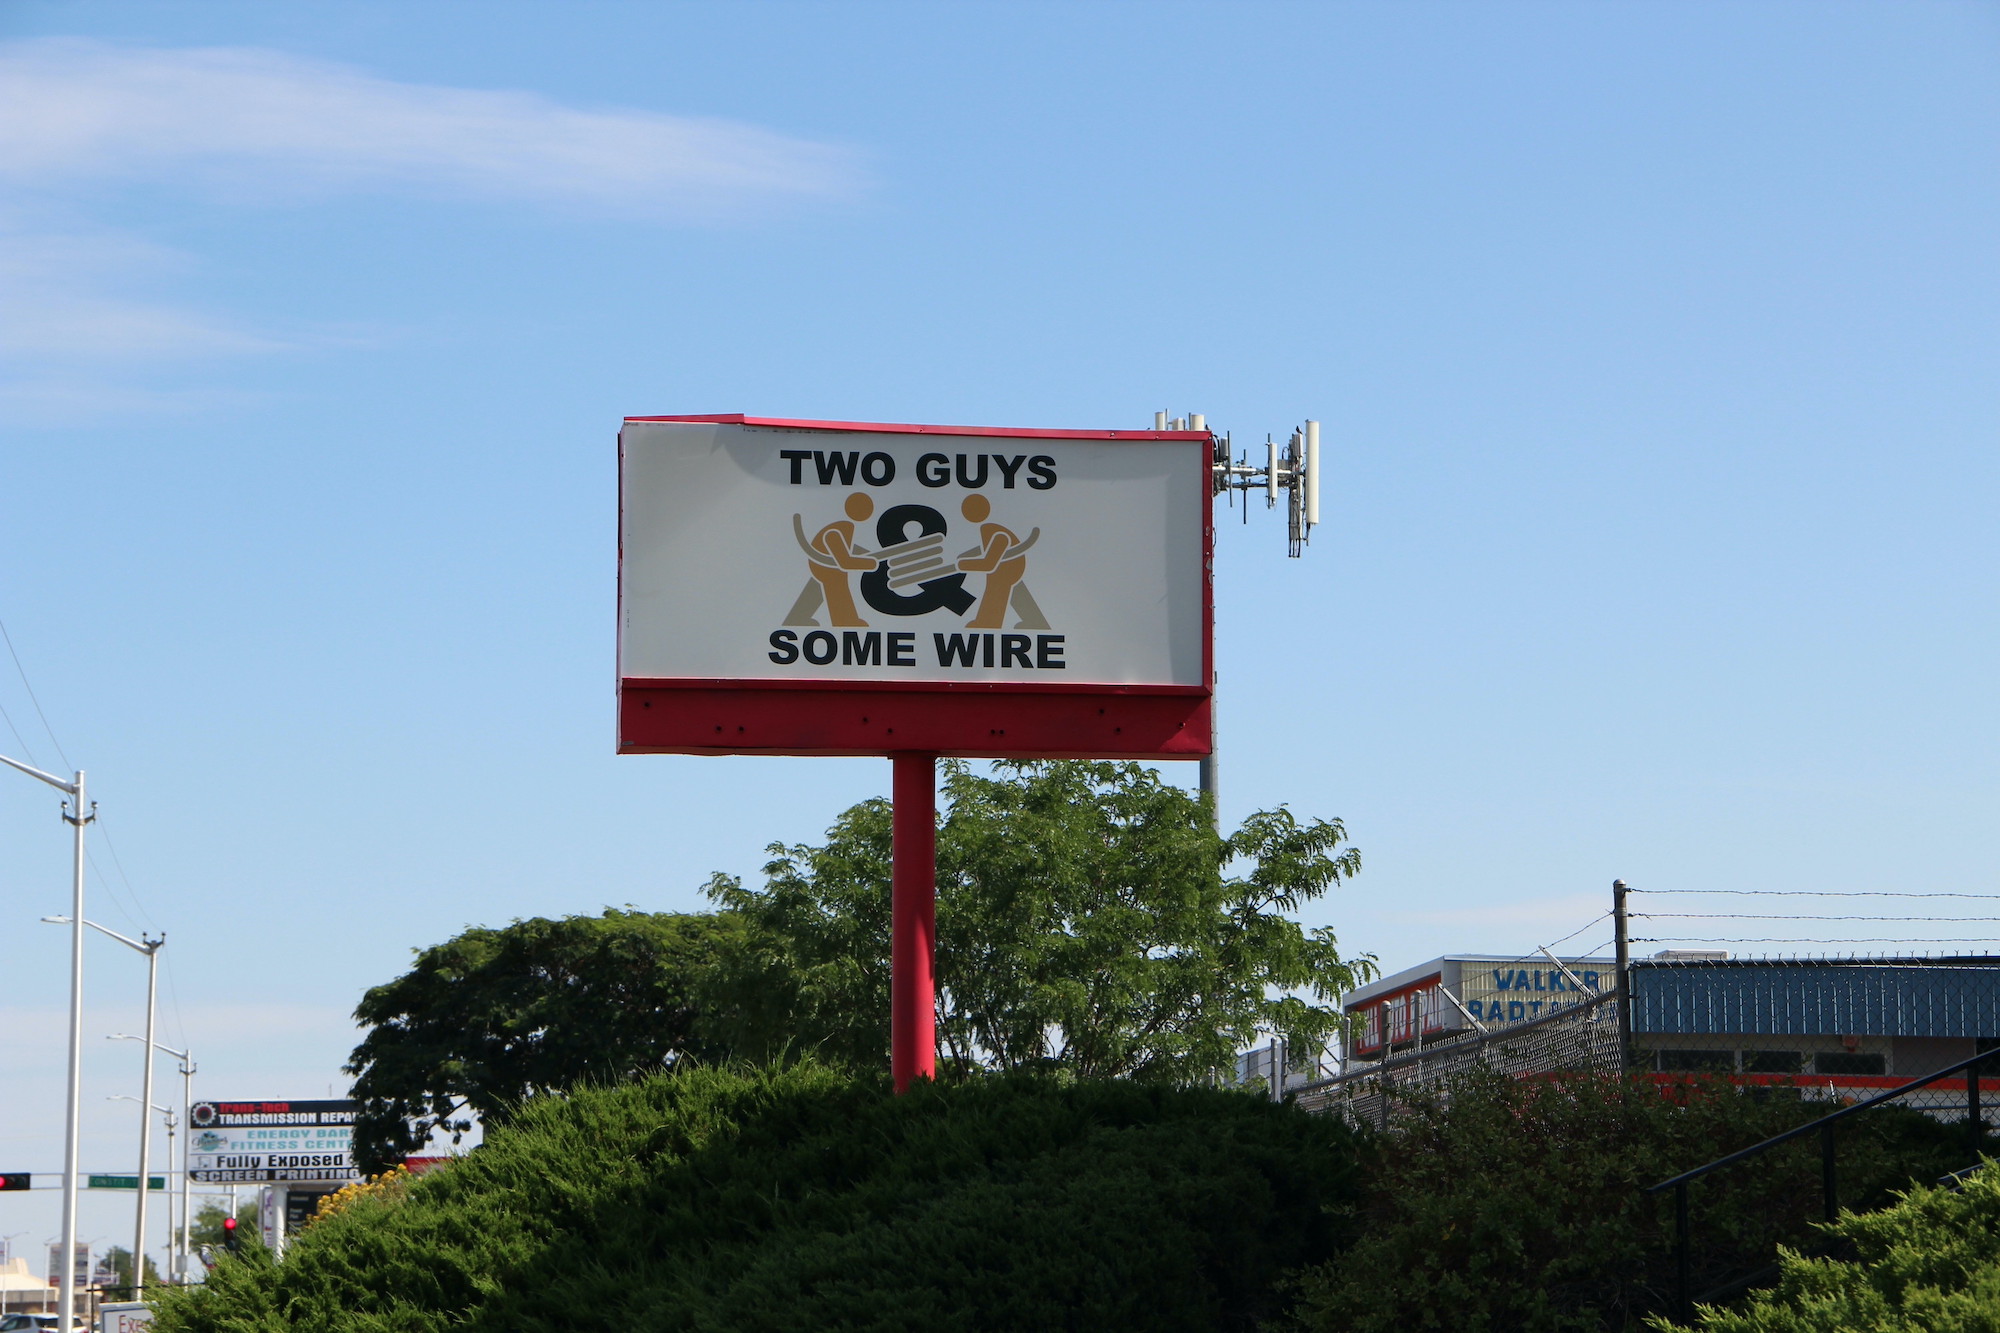 Two Guys and Some Wire, Inc. 1208 Juan Tabo Blvd NE, Albuquerque, NM 87112Picture of